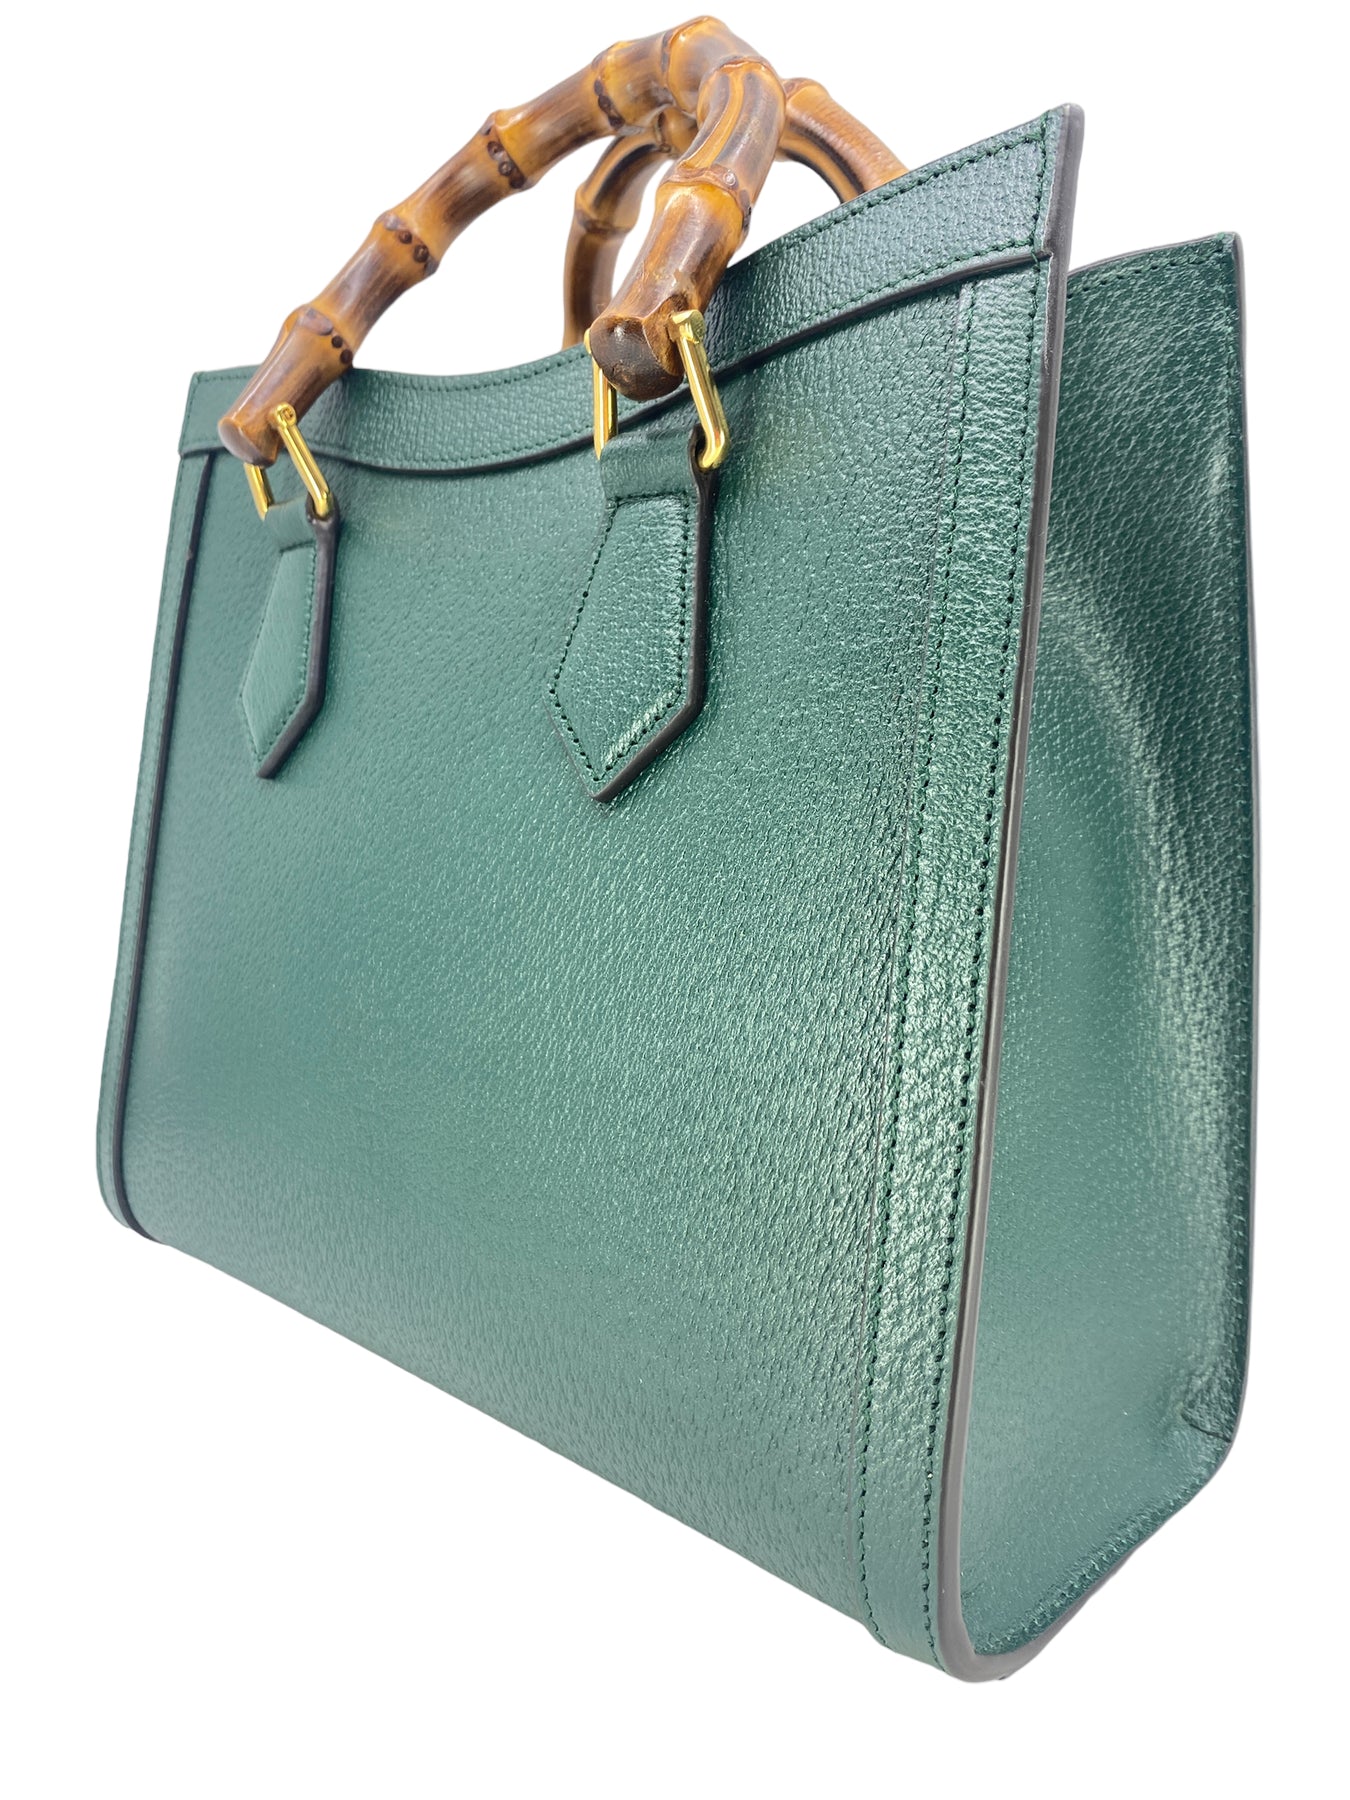 Gucci Diana small tote bag in green leather